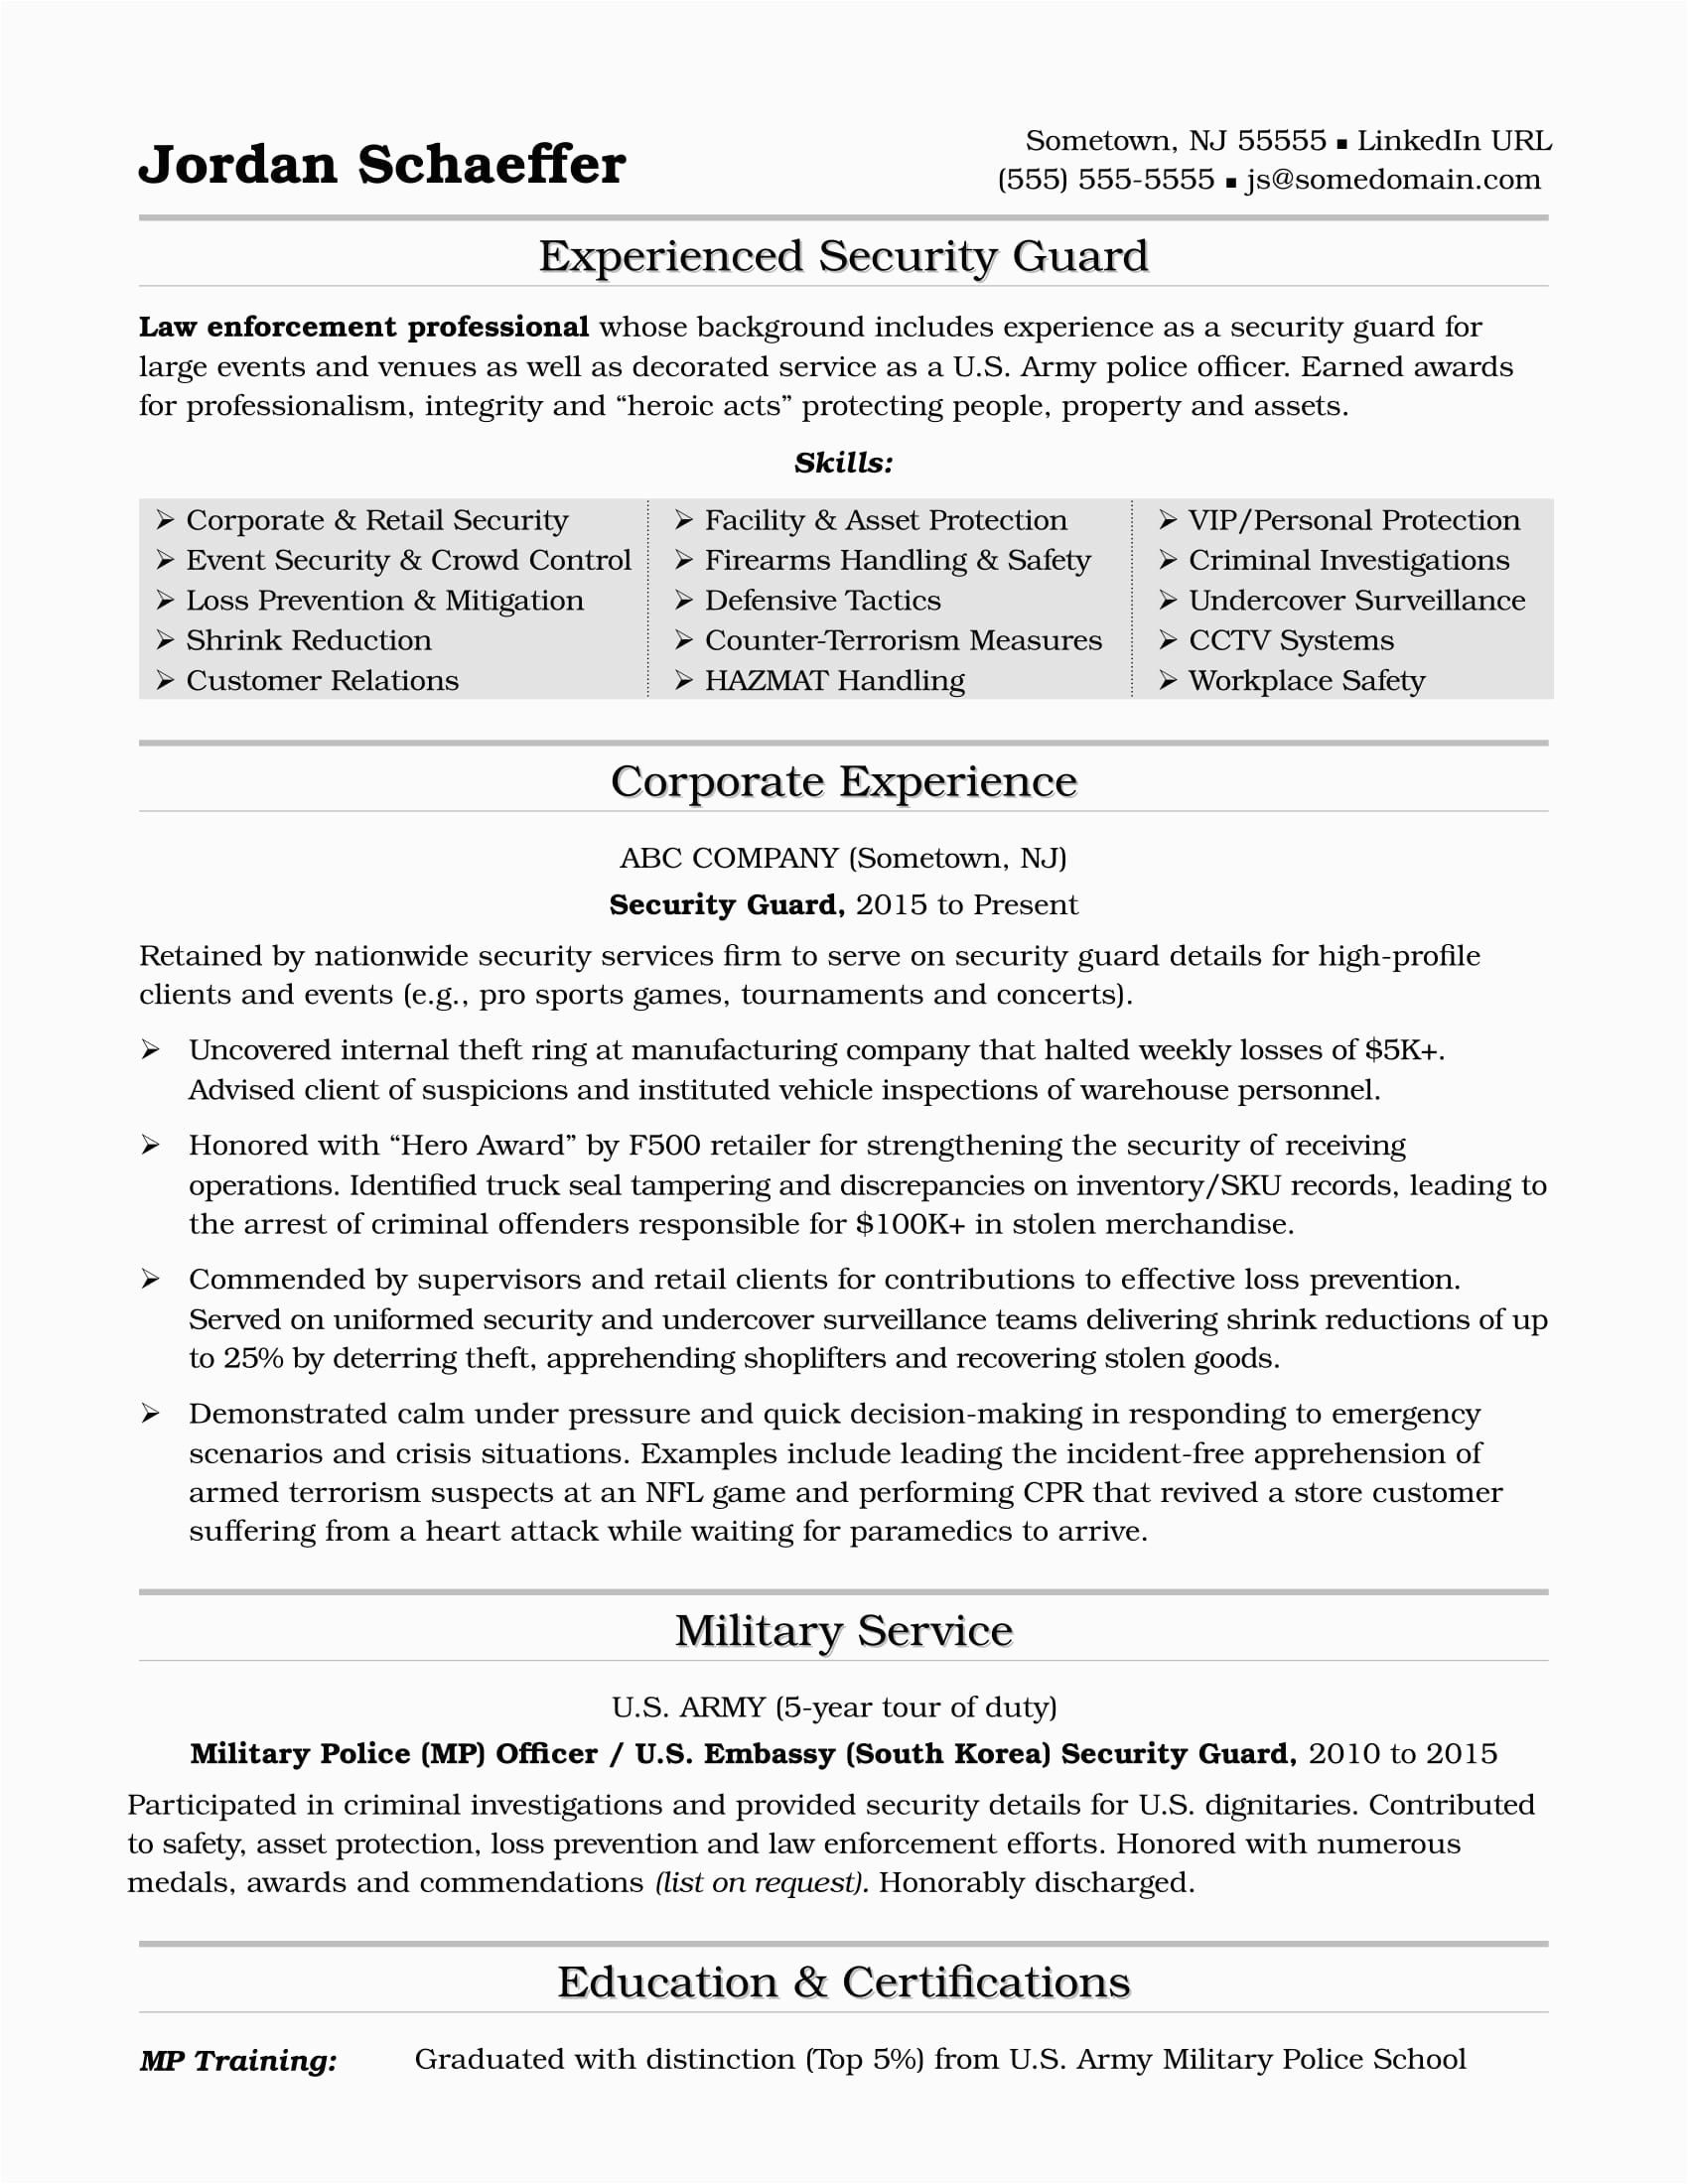 Sample Resume for Security Officer Position Security Guard Resume Sample